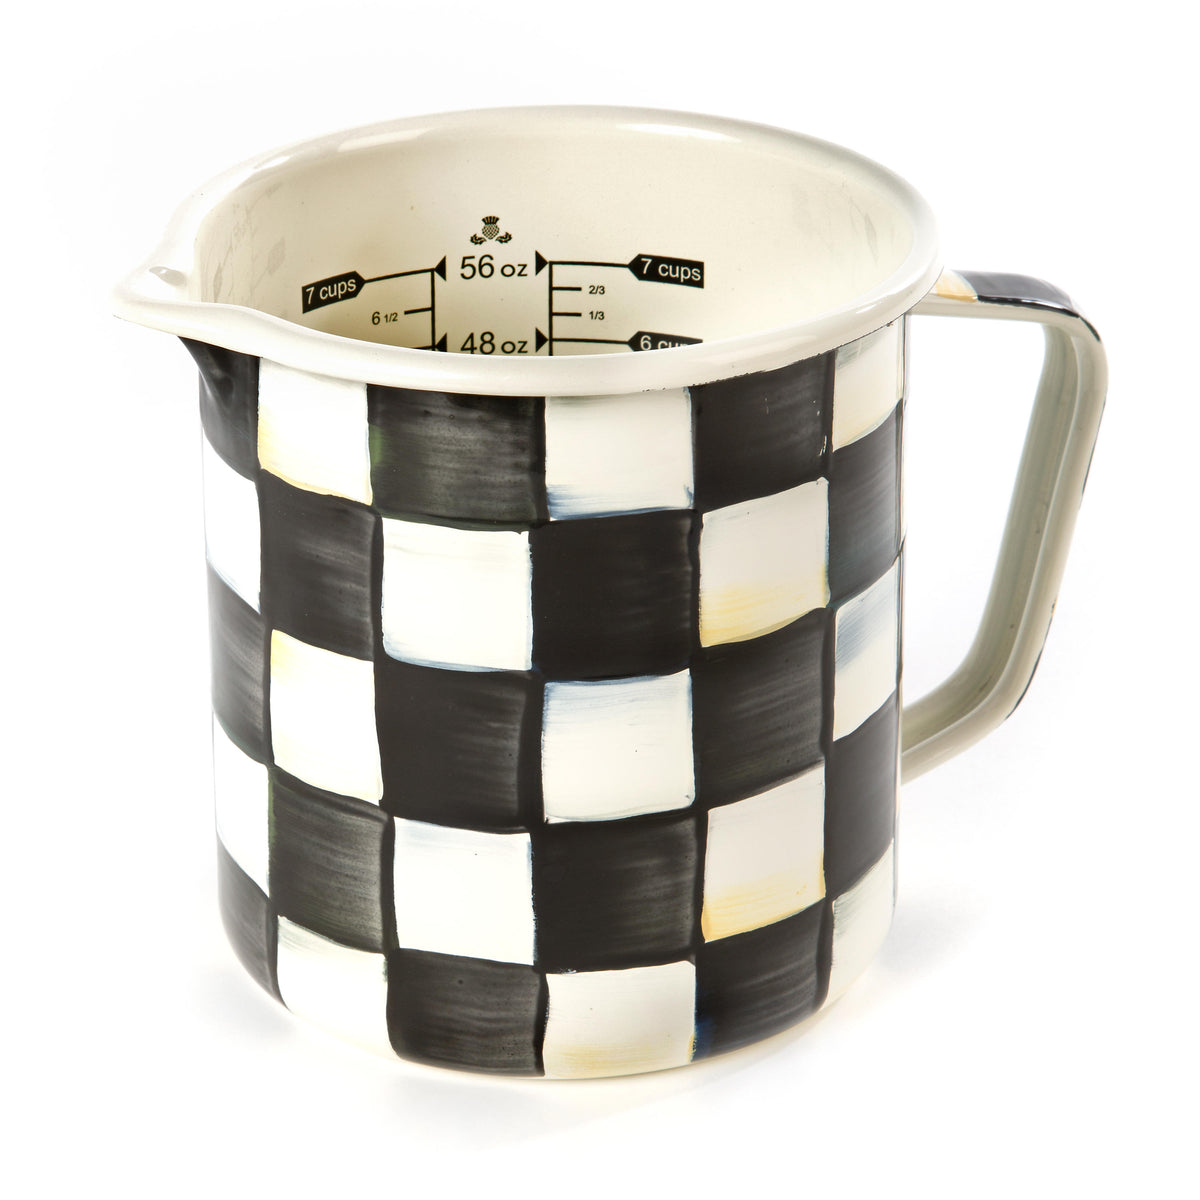 Courtly Check Enamel 7 Cup Measuring Cup